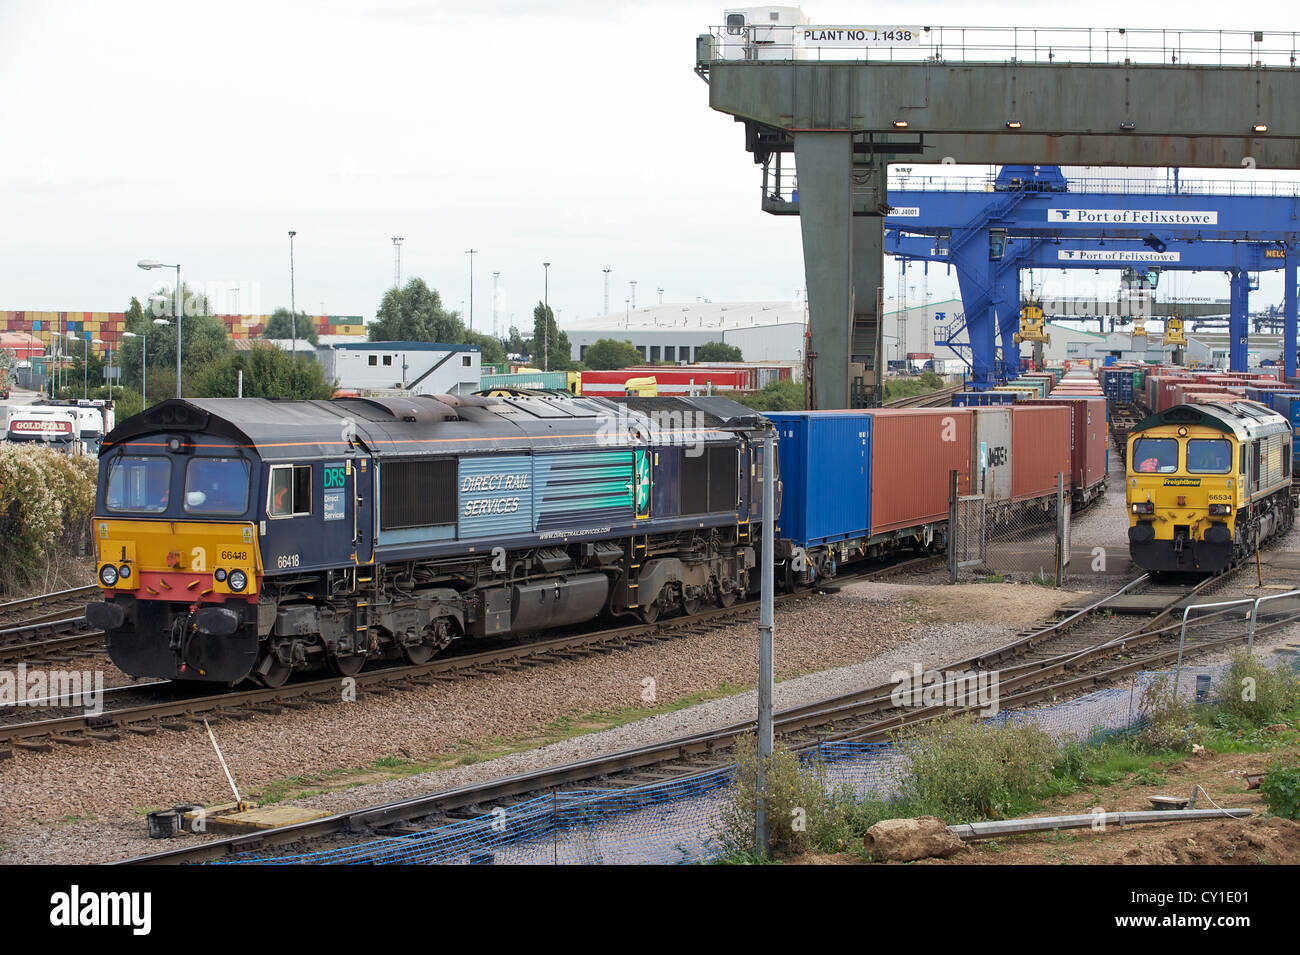 DRS (Direct Rail Services) freight train pulling out of the North rail-freight terminal, Port of Felixstowe, Suffolk, UK. Stock Photo